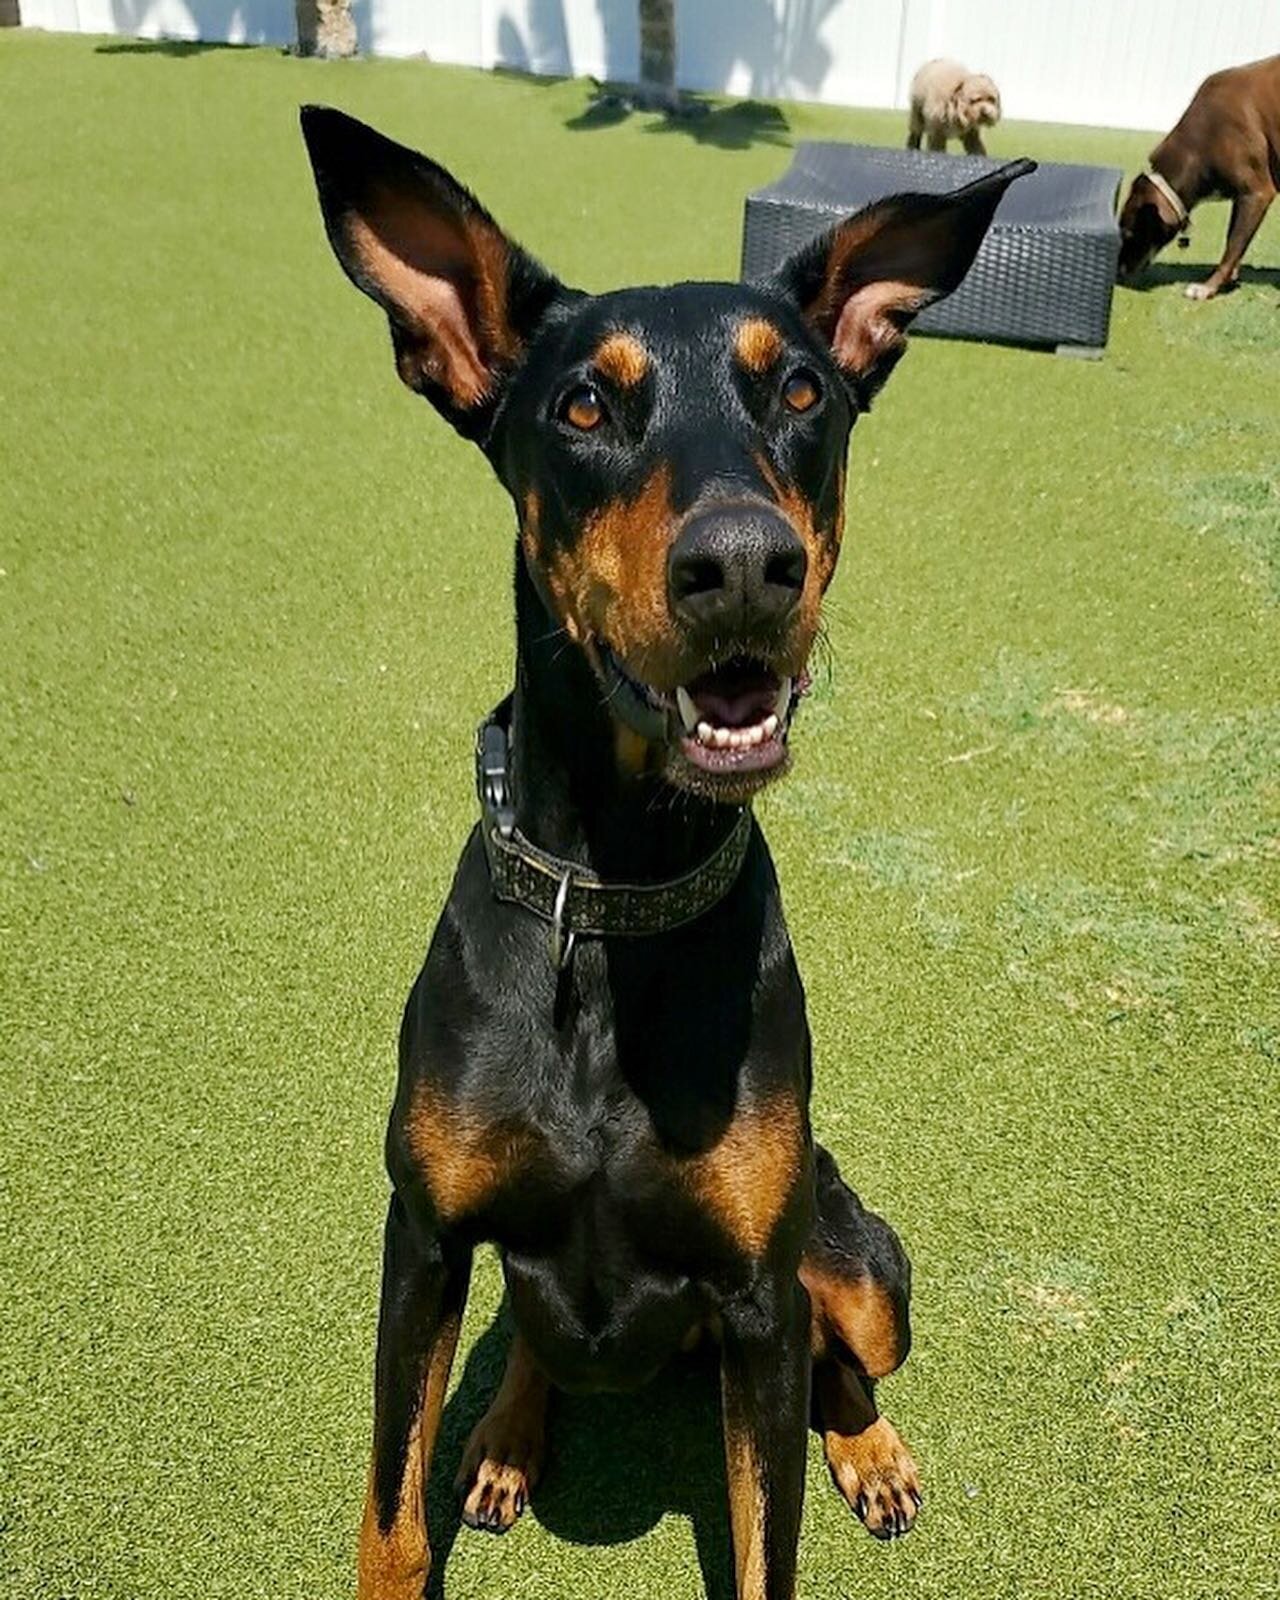 Adopt Xina! 

She is a 6 year old Doberman. She is house trained and knows her basic commands. She loves people, dogs, and toys: specifically balls. She can be a bit shy at first, but once she warms up, she is the sweetest girl. She has made a ton of